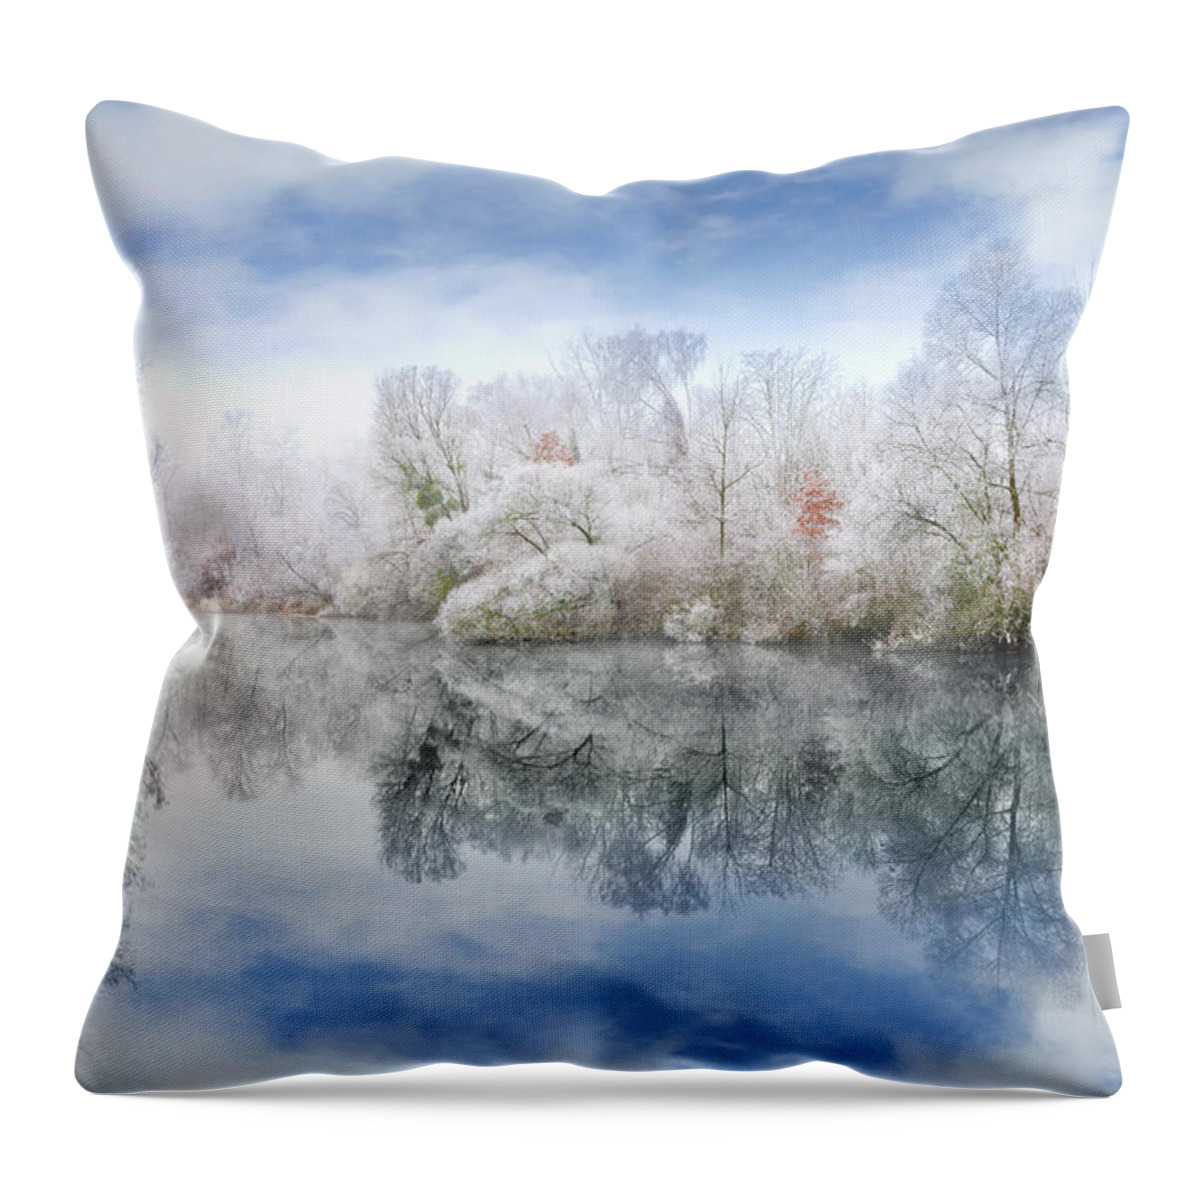 Landscape Throw Pillow featuring the photograph White Space by Philippe Sainte-Laudy